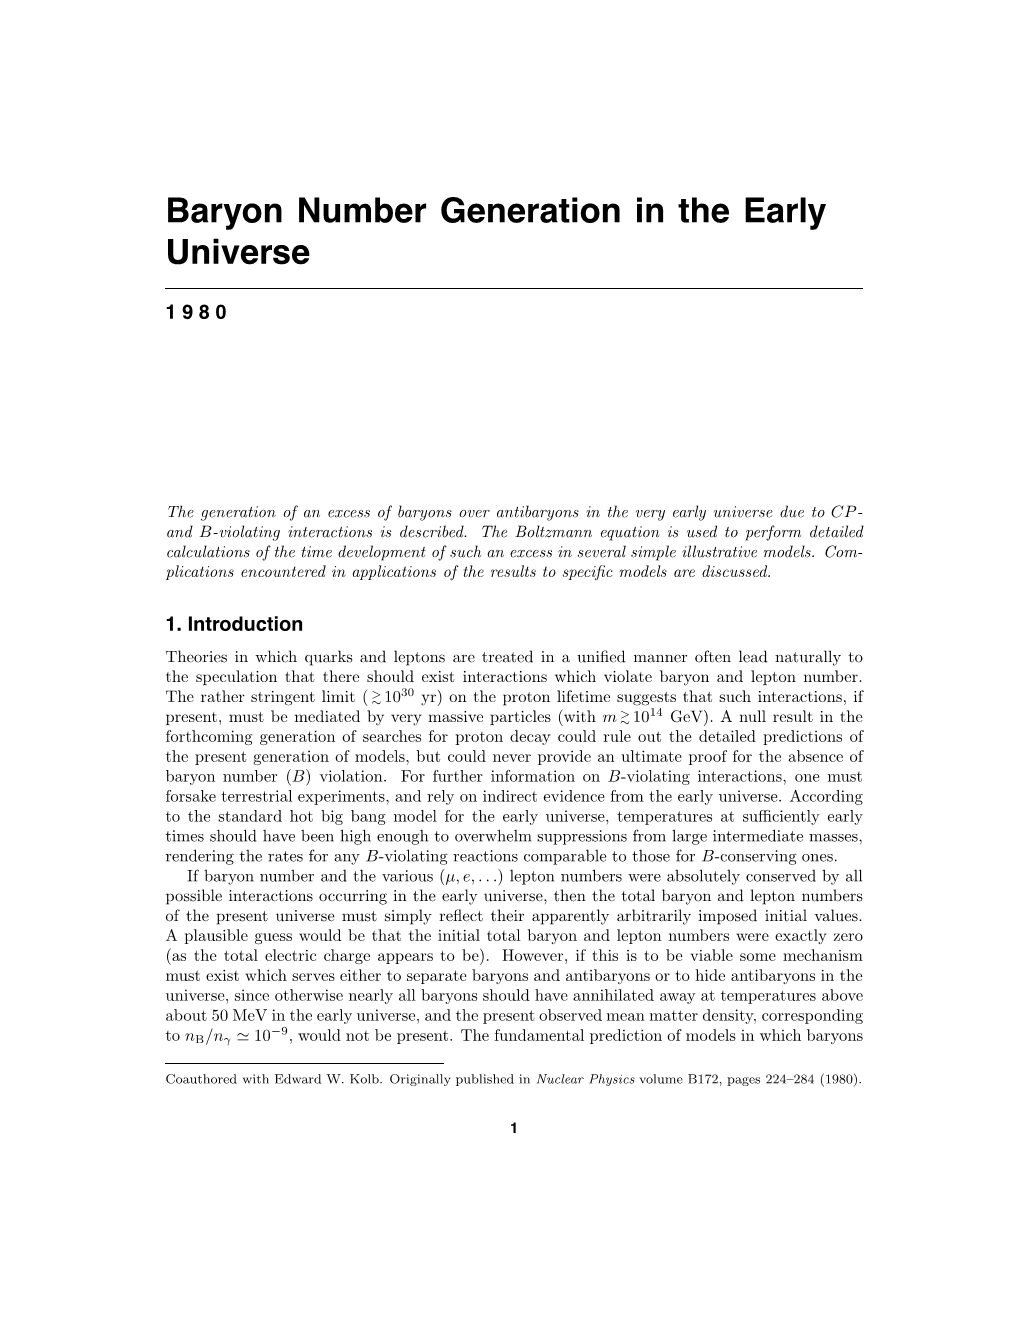 Baryon Number Generation in the Early Universe